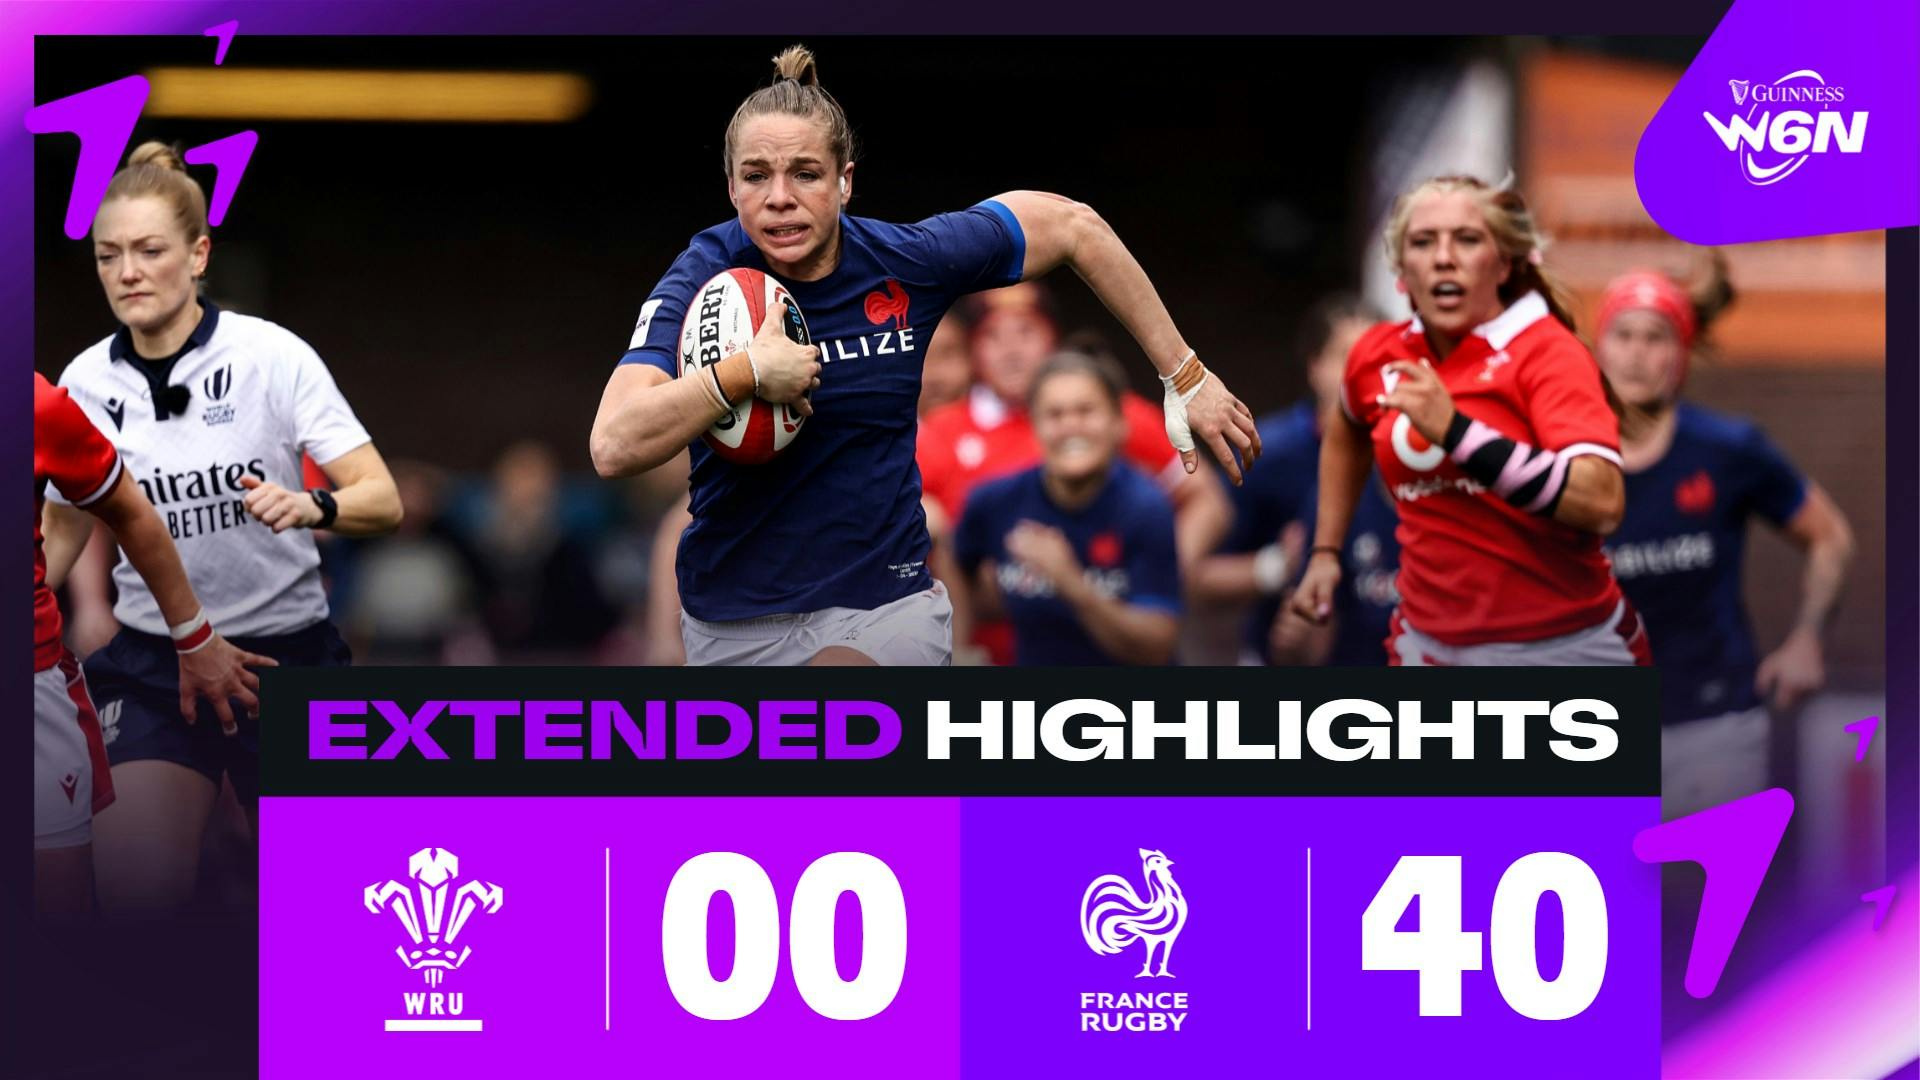 EXTENDED HIGHLIGHTS | GUINNESS WOMEN'S SIX NATIONS | WALES V FRANCE